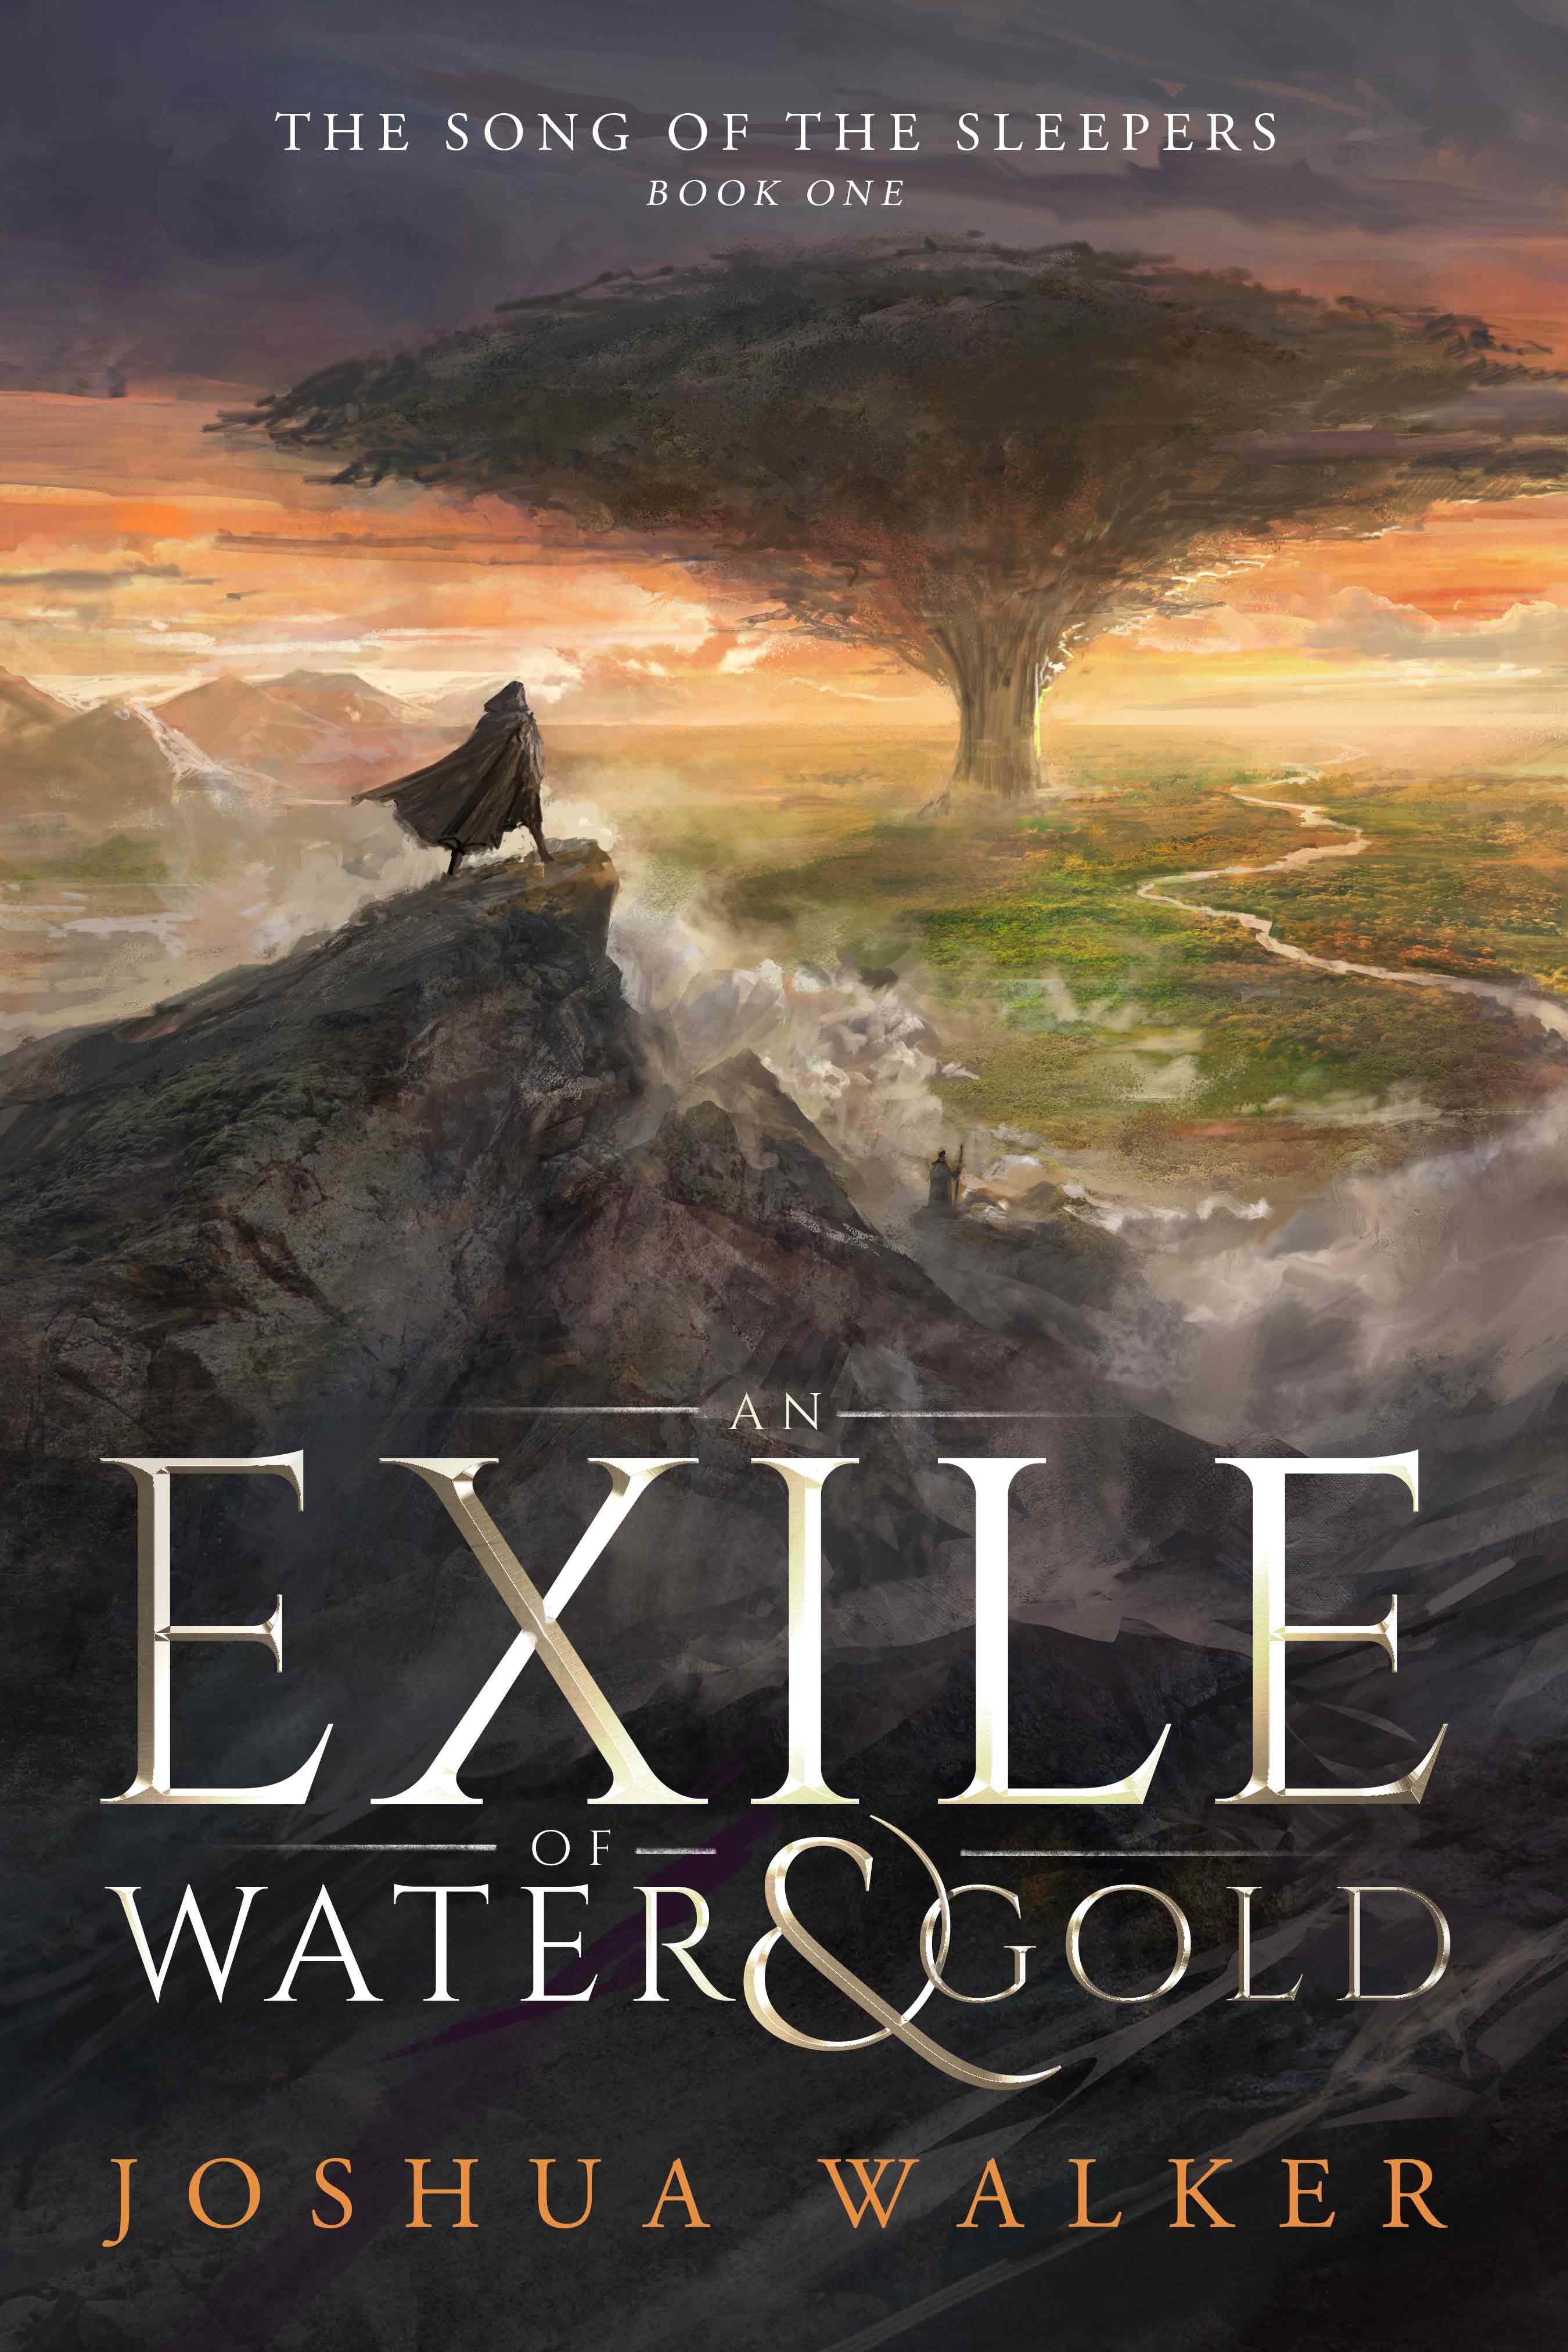 An Exile of Water and Gold, by Joshua Walker